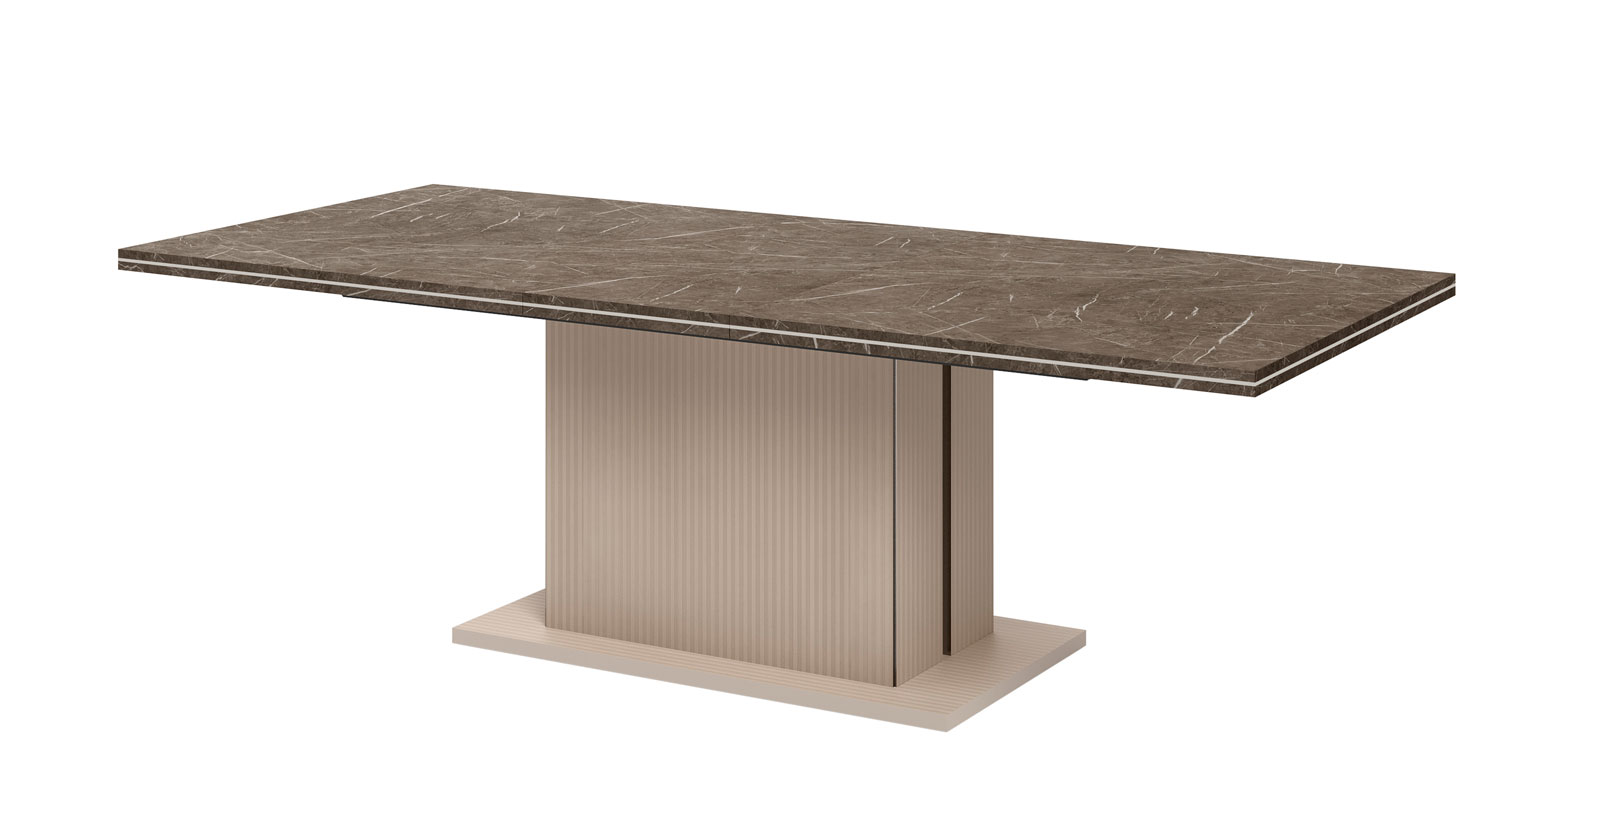 Brands Camel Modum Collection, Italy Fidia- Aris Dining table